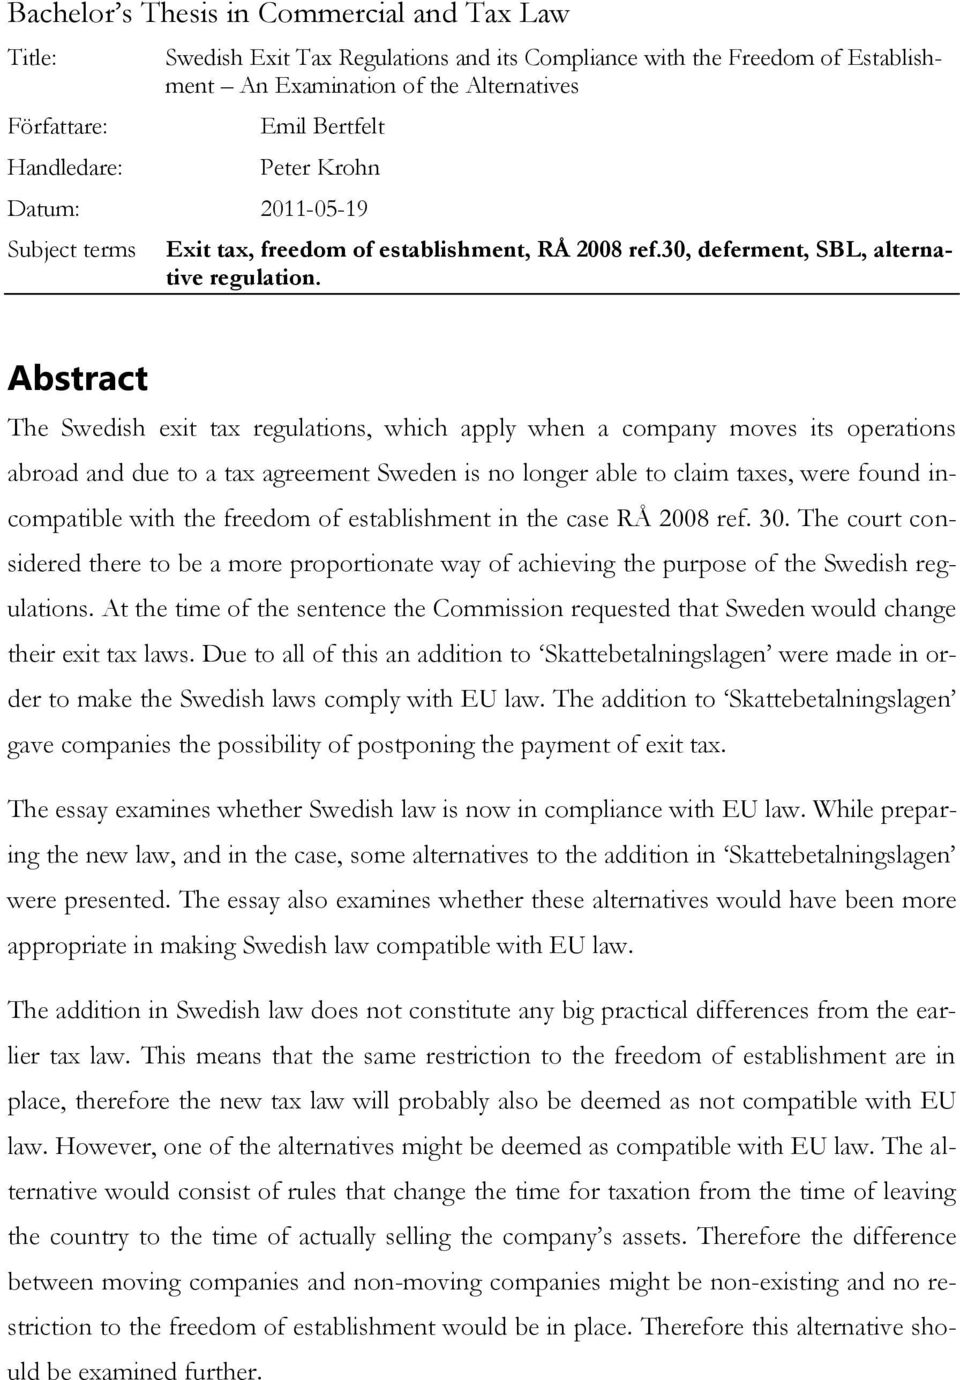 Abstract The Swedish exit tax regulations, which apply when a company moves its operations abroad and due to a tax agreement Sweden is no longer able to claim taxes, were found incompatible with the